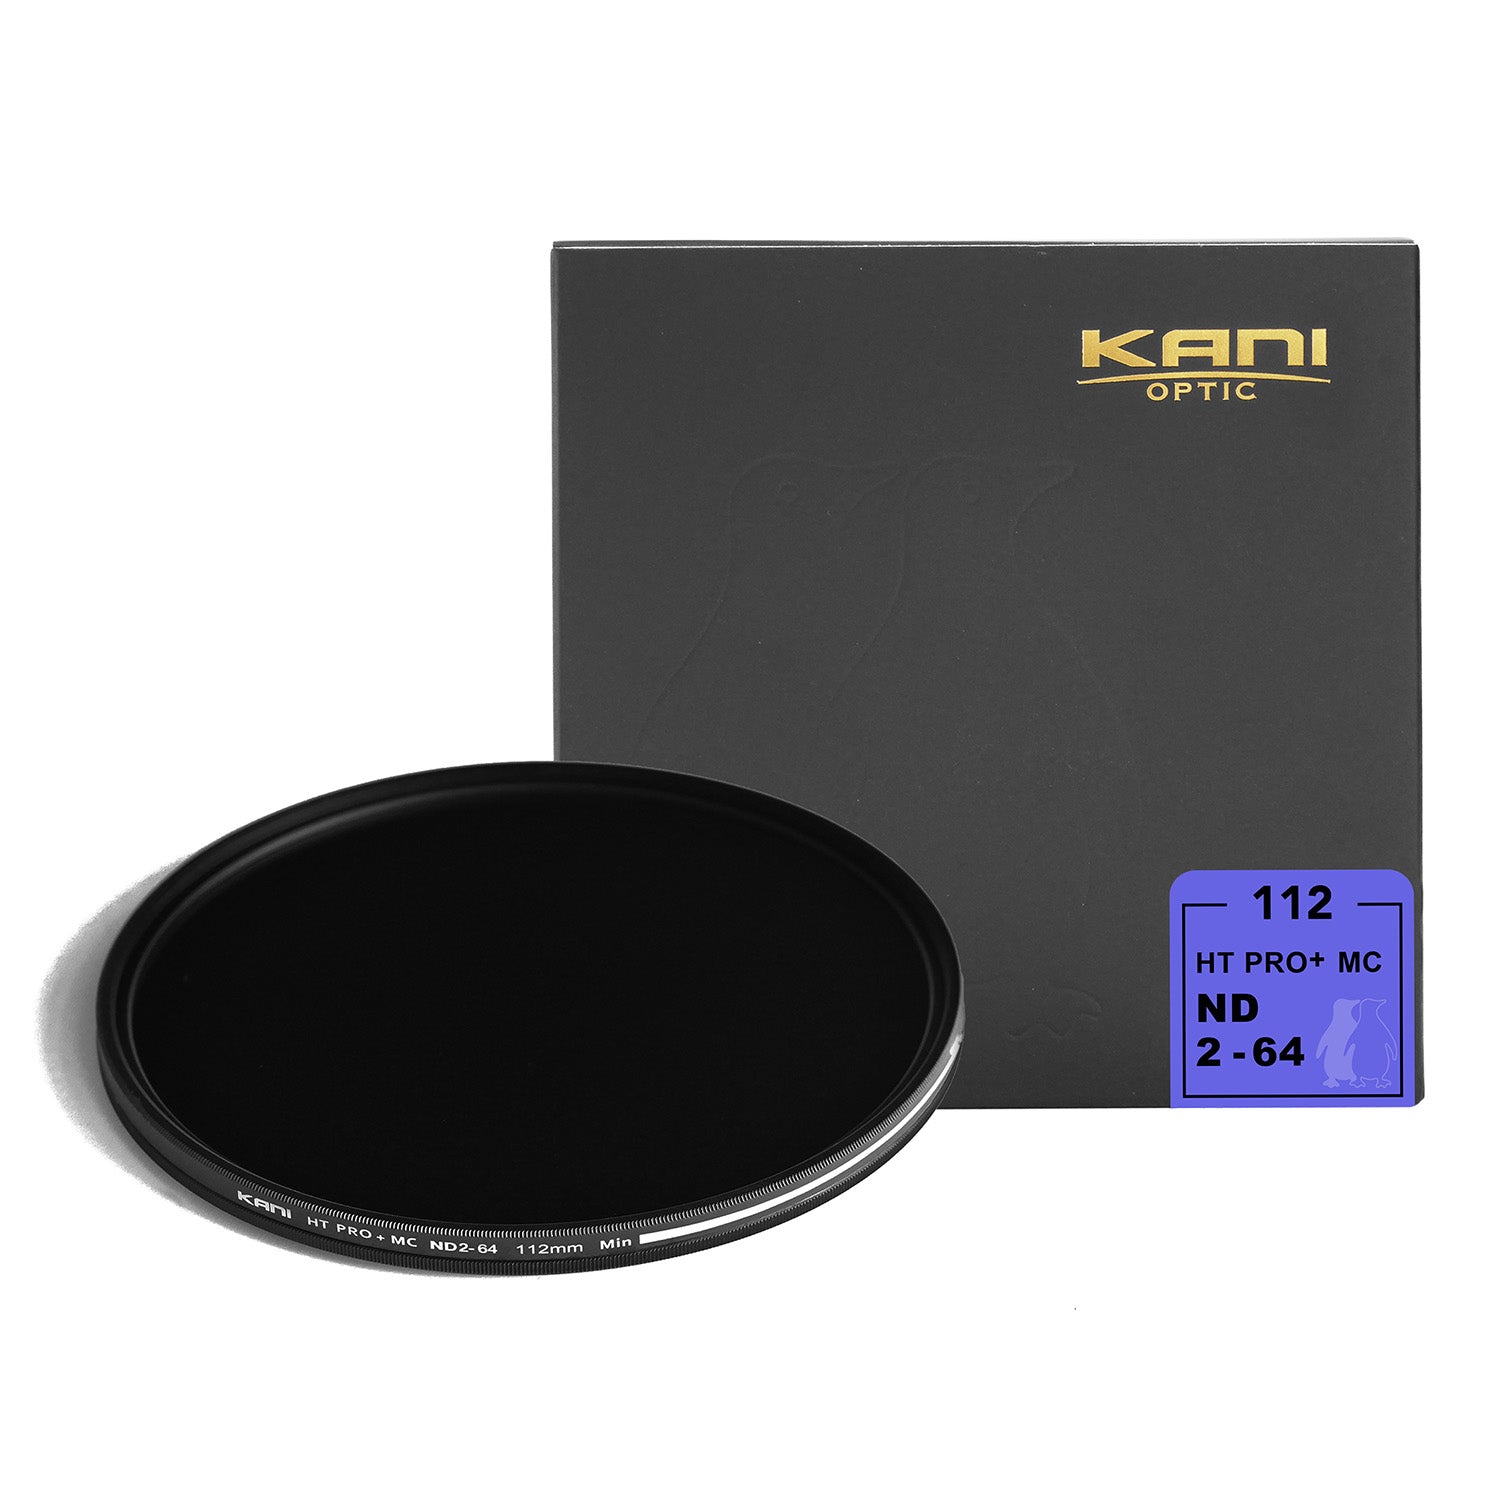 Variable ND Filter Collection - Kanifilterglobal